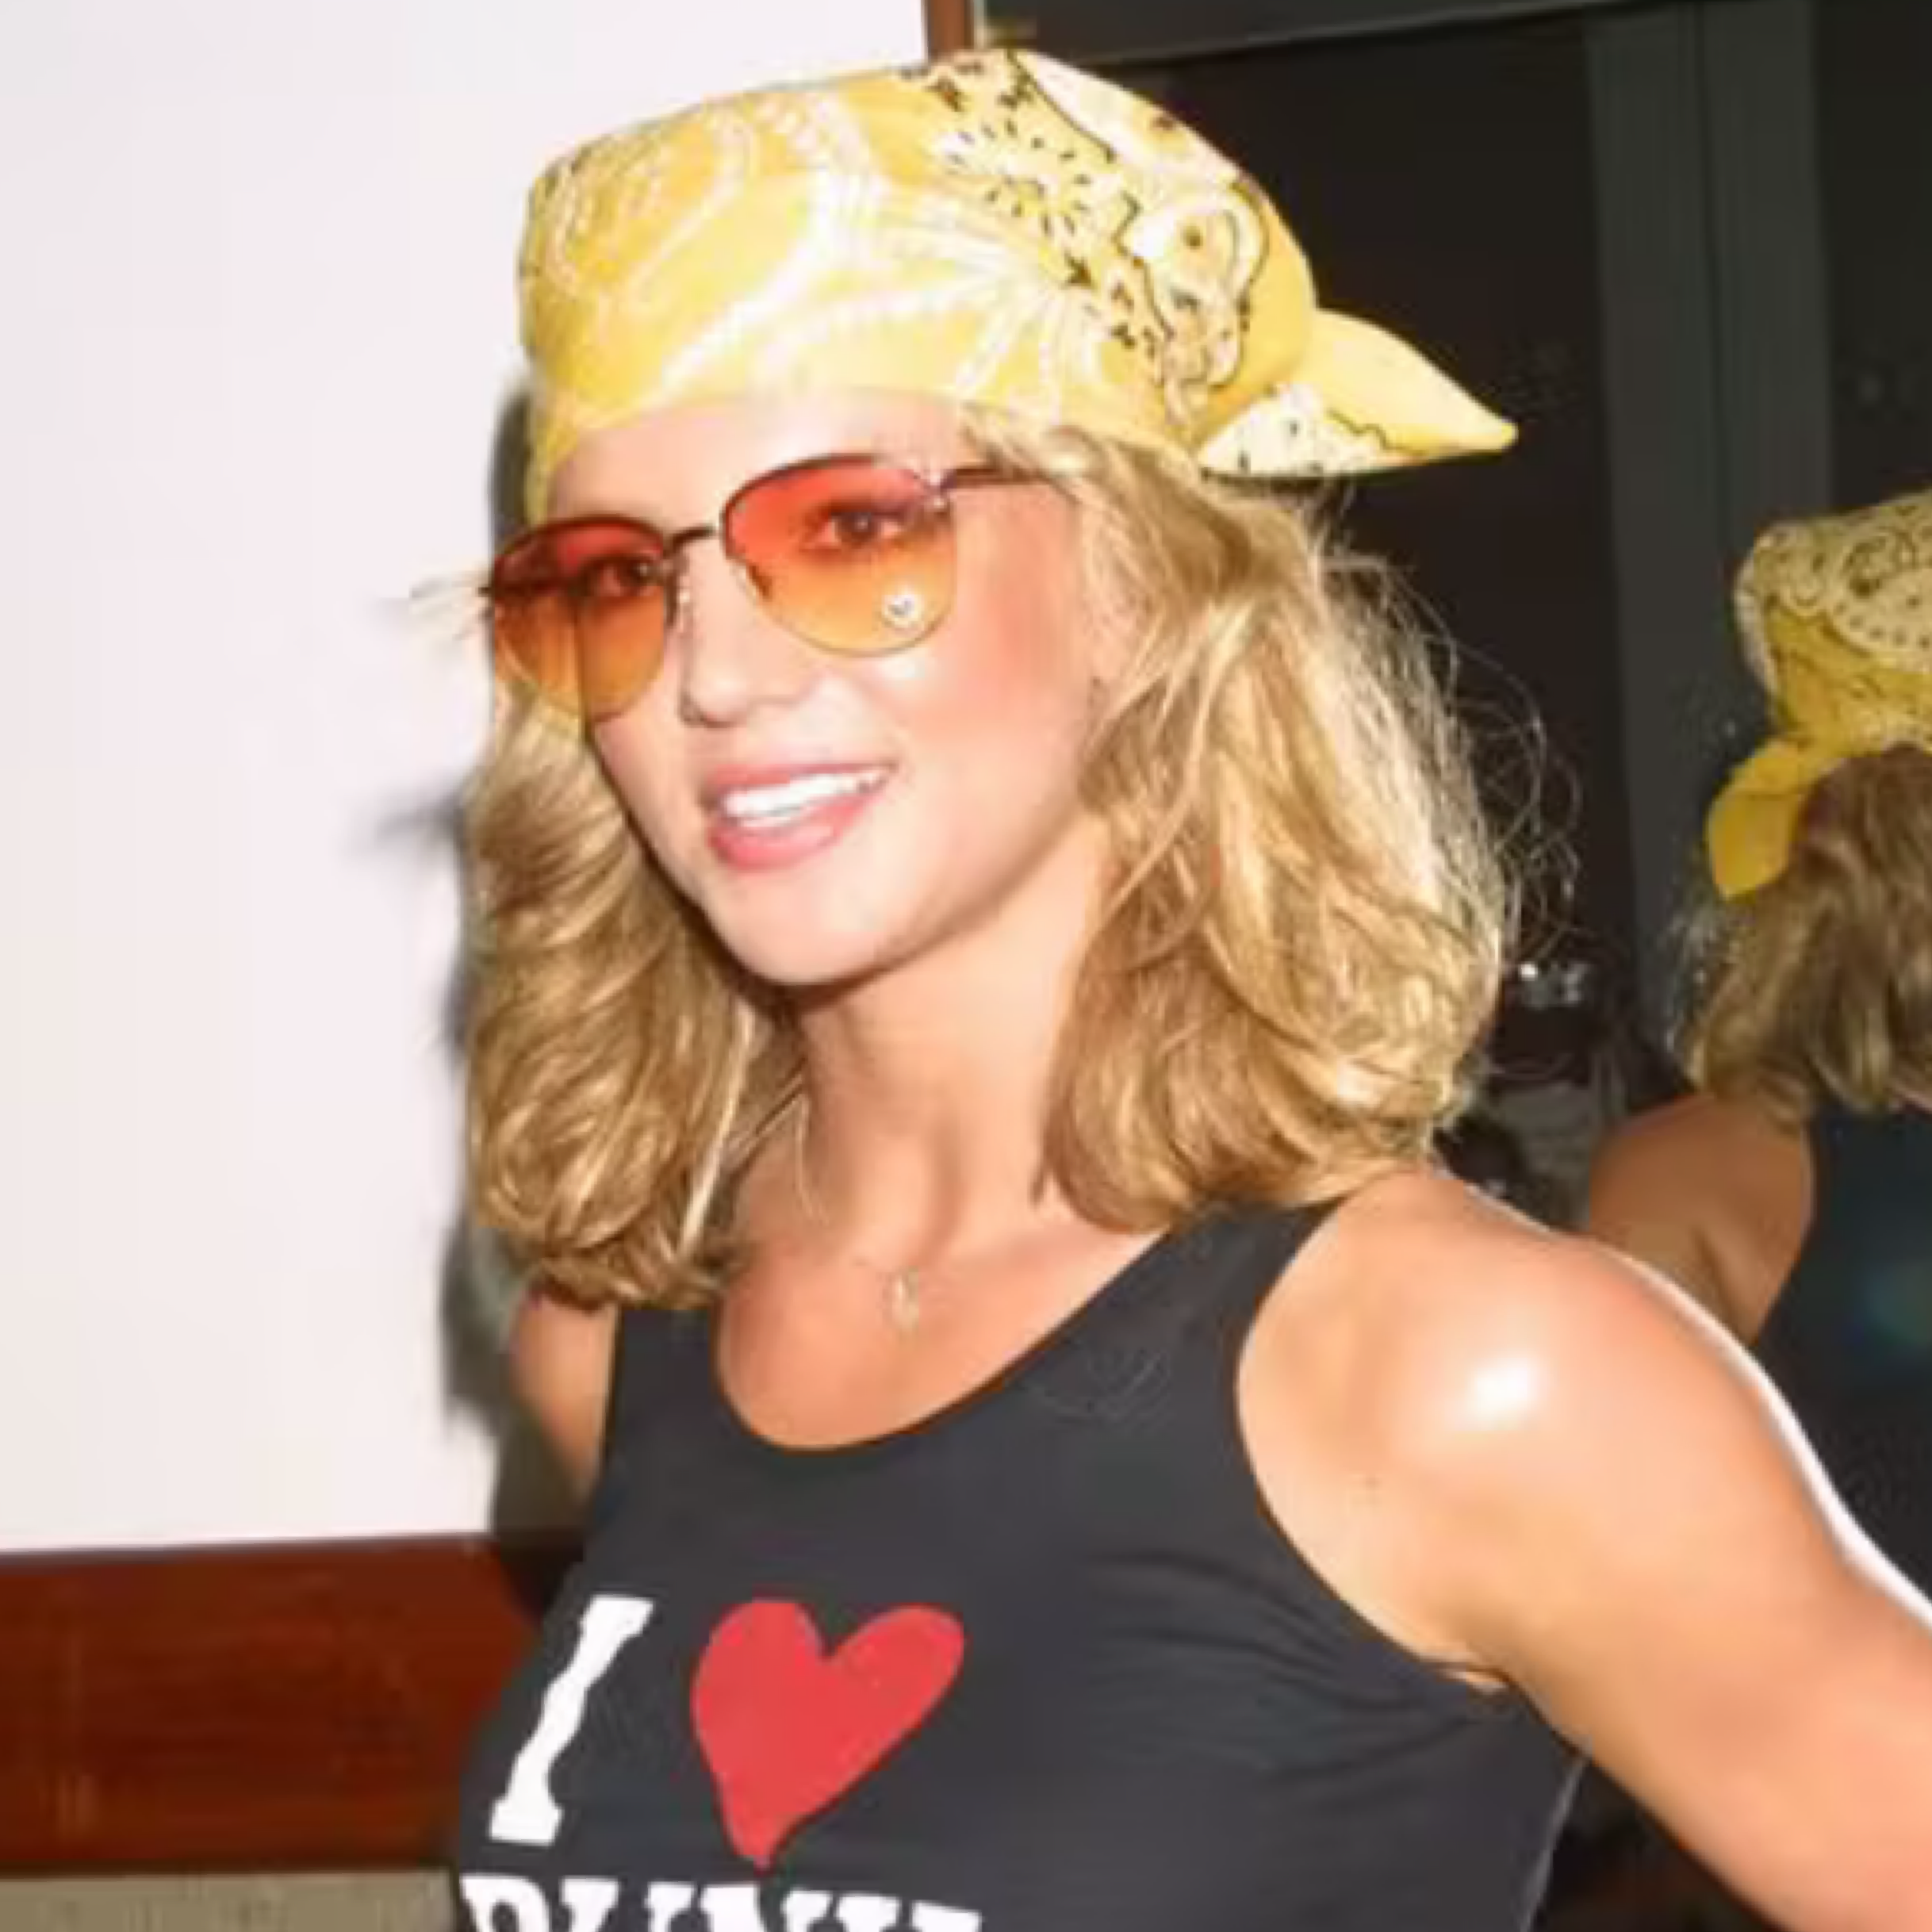 Channel some 2000s Britney into your life with some of her most famous sunglasses!